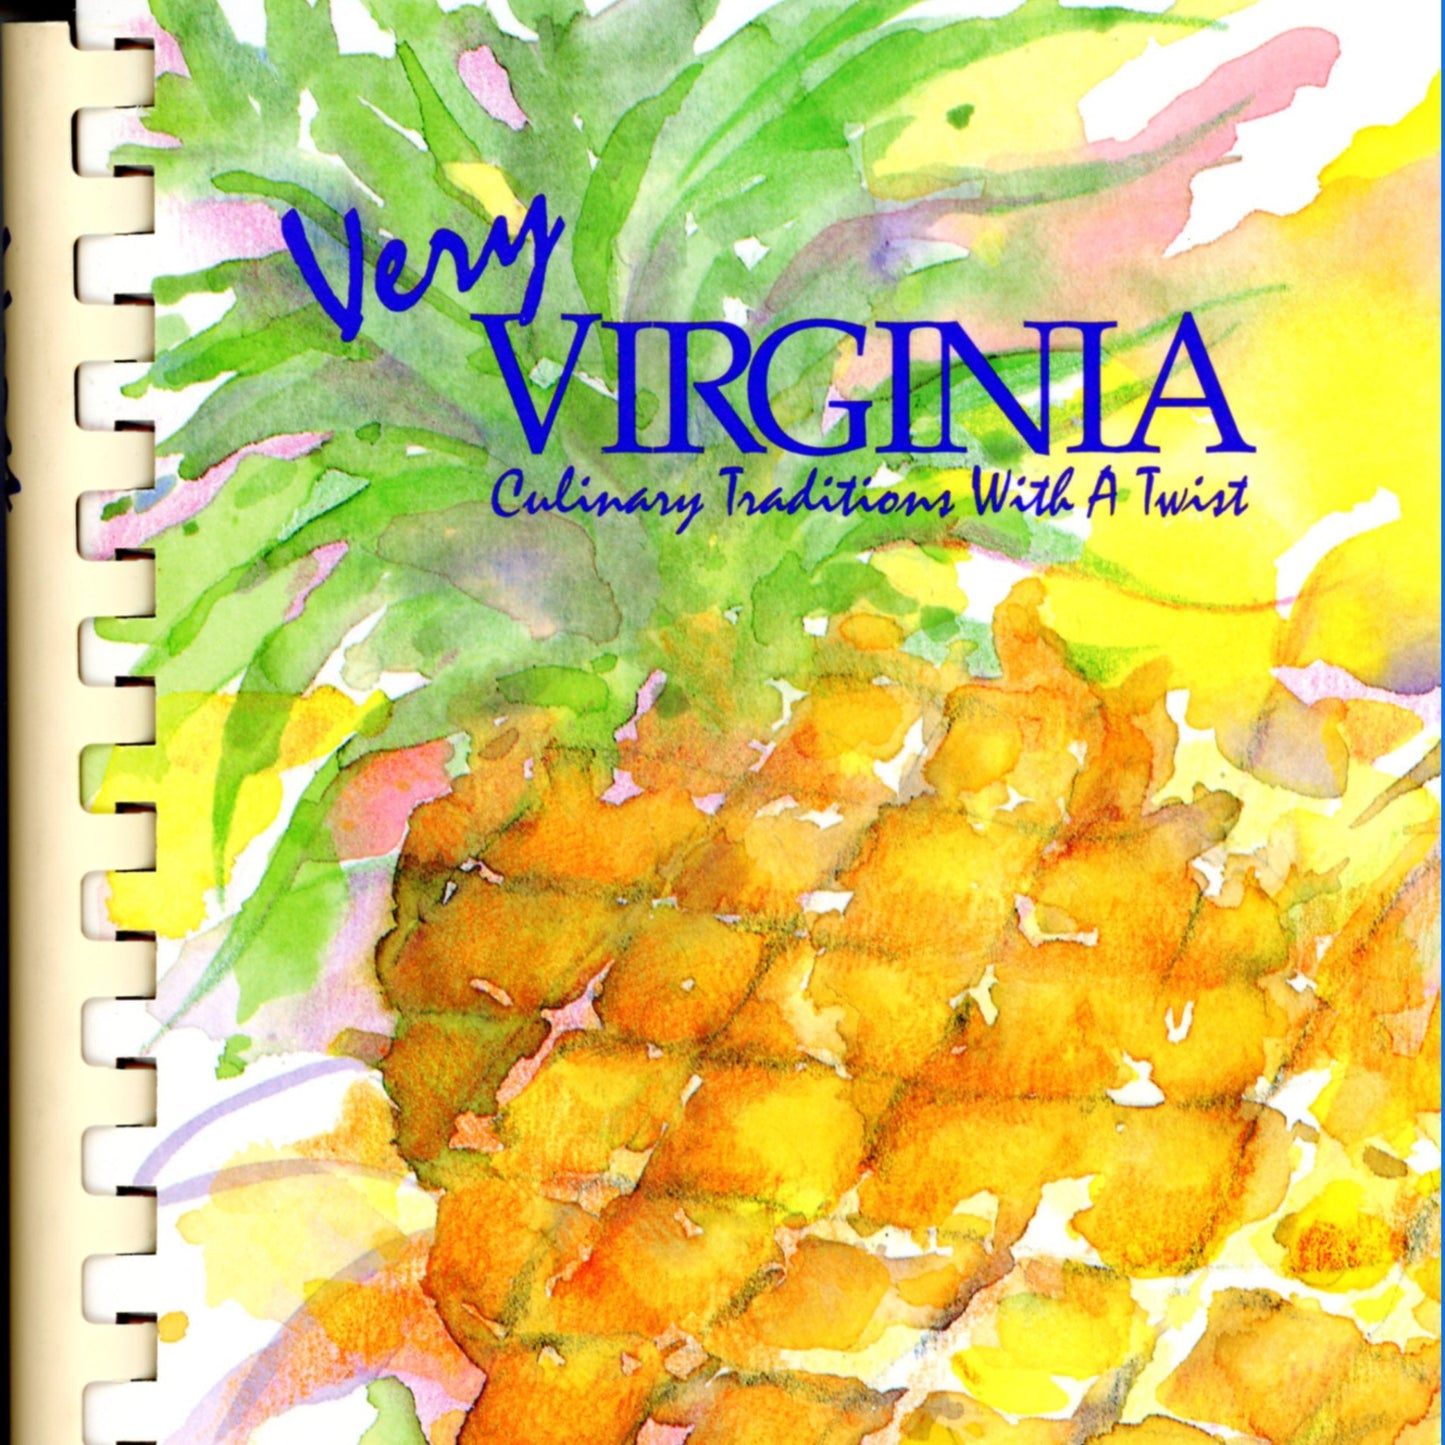 VERY VIRGINIA: Culinary Traditions With a Twist | Junior League of Hampton Roads | 1996 ©1995